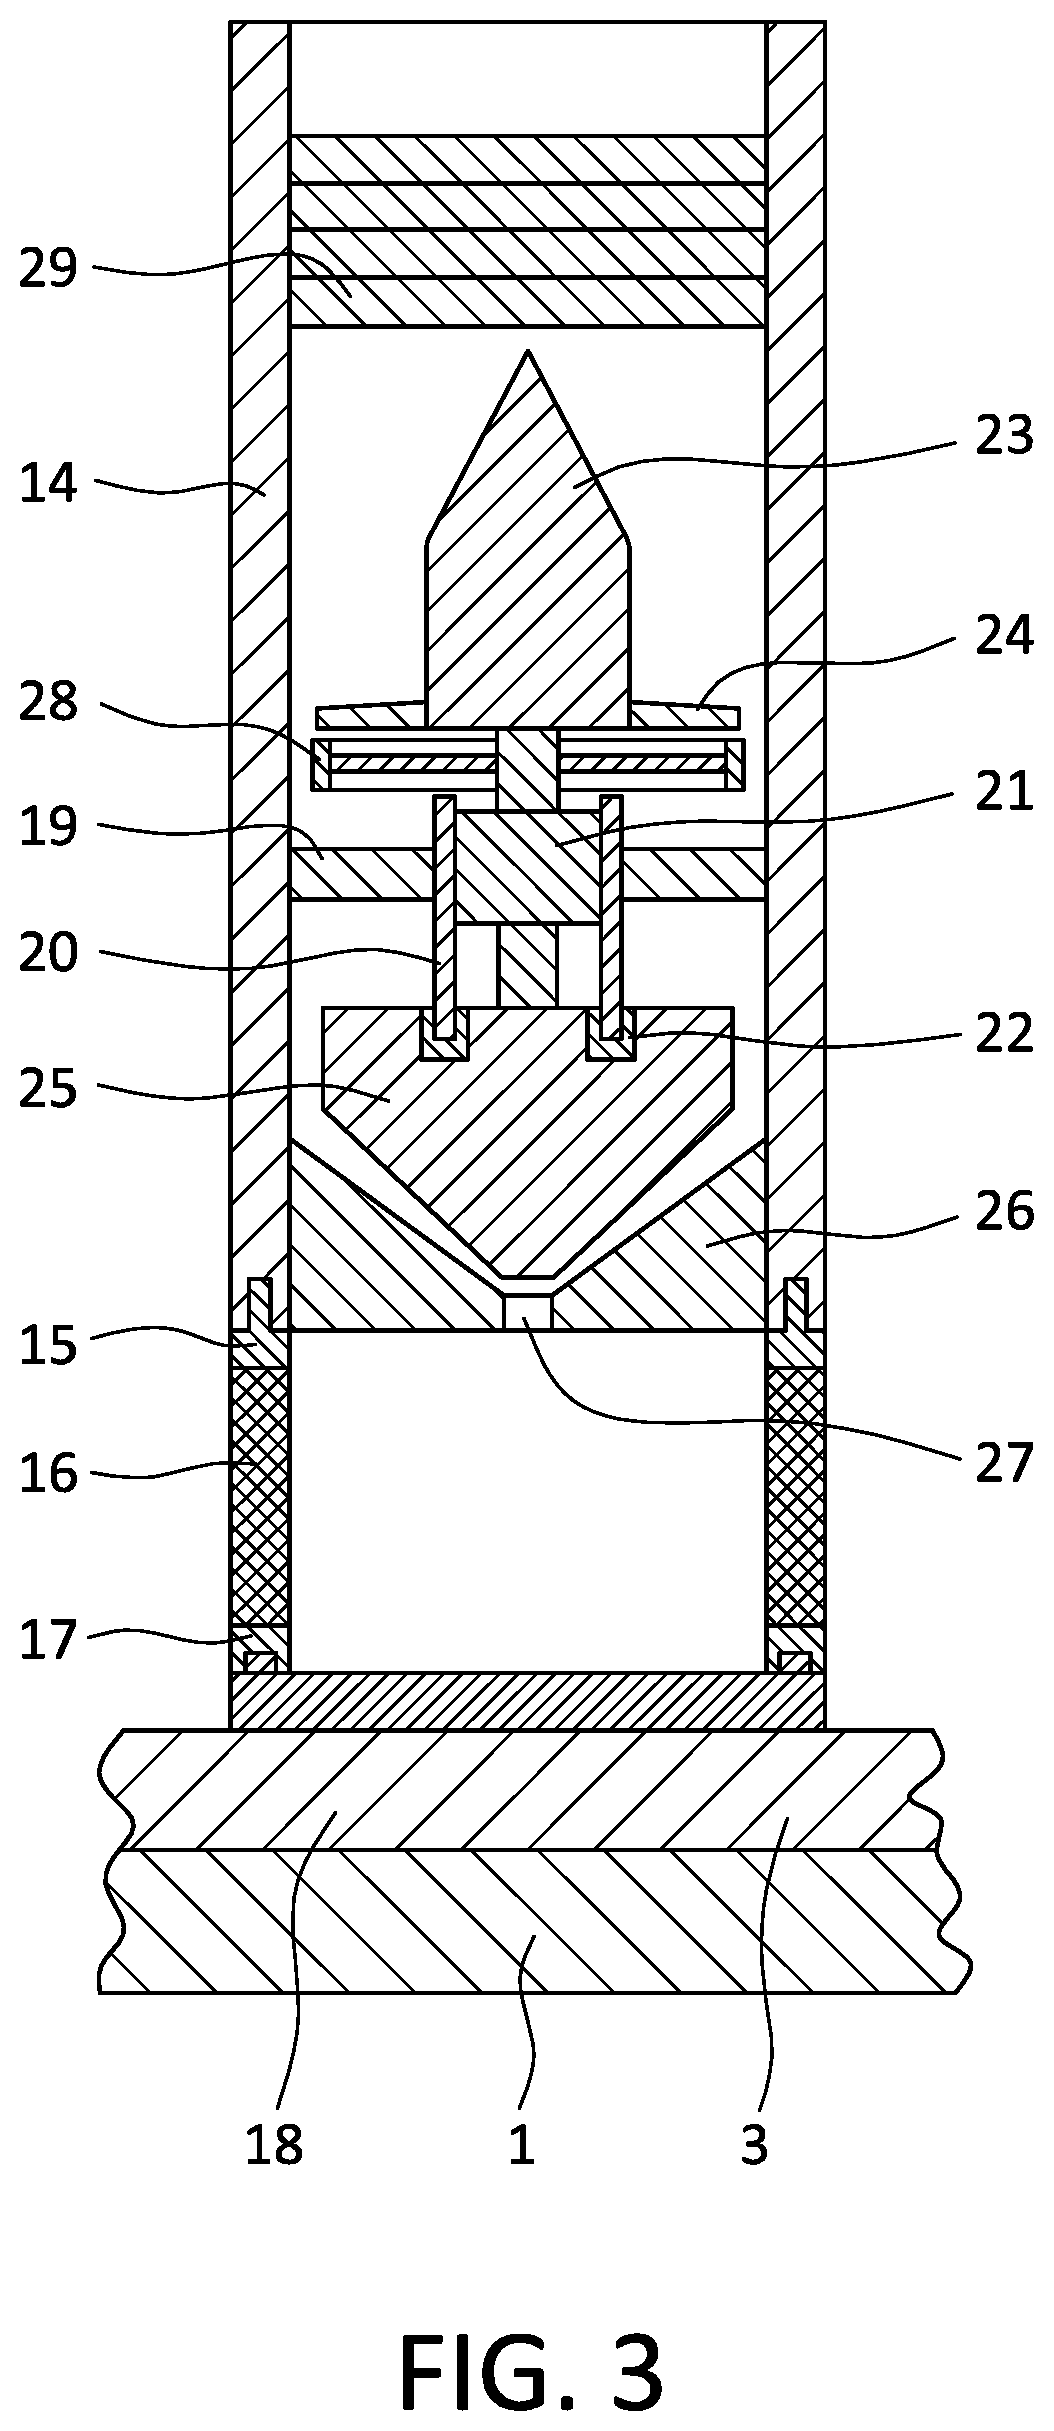 Oil leaching and extraction assembly capable of repeated separation